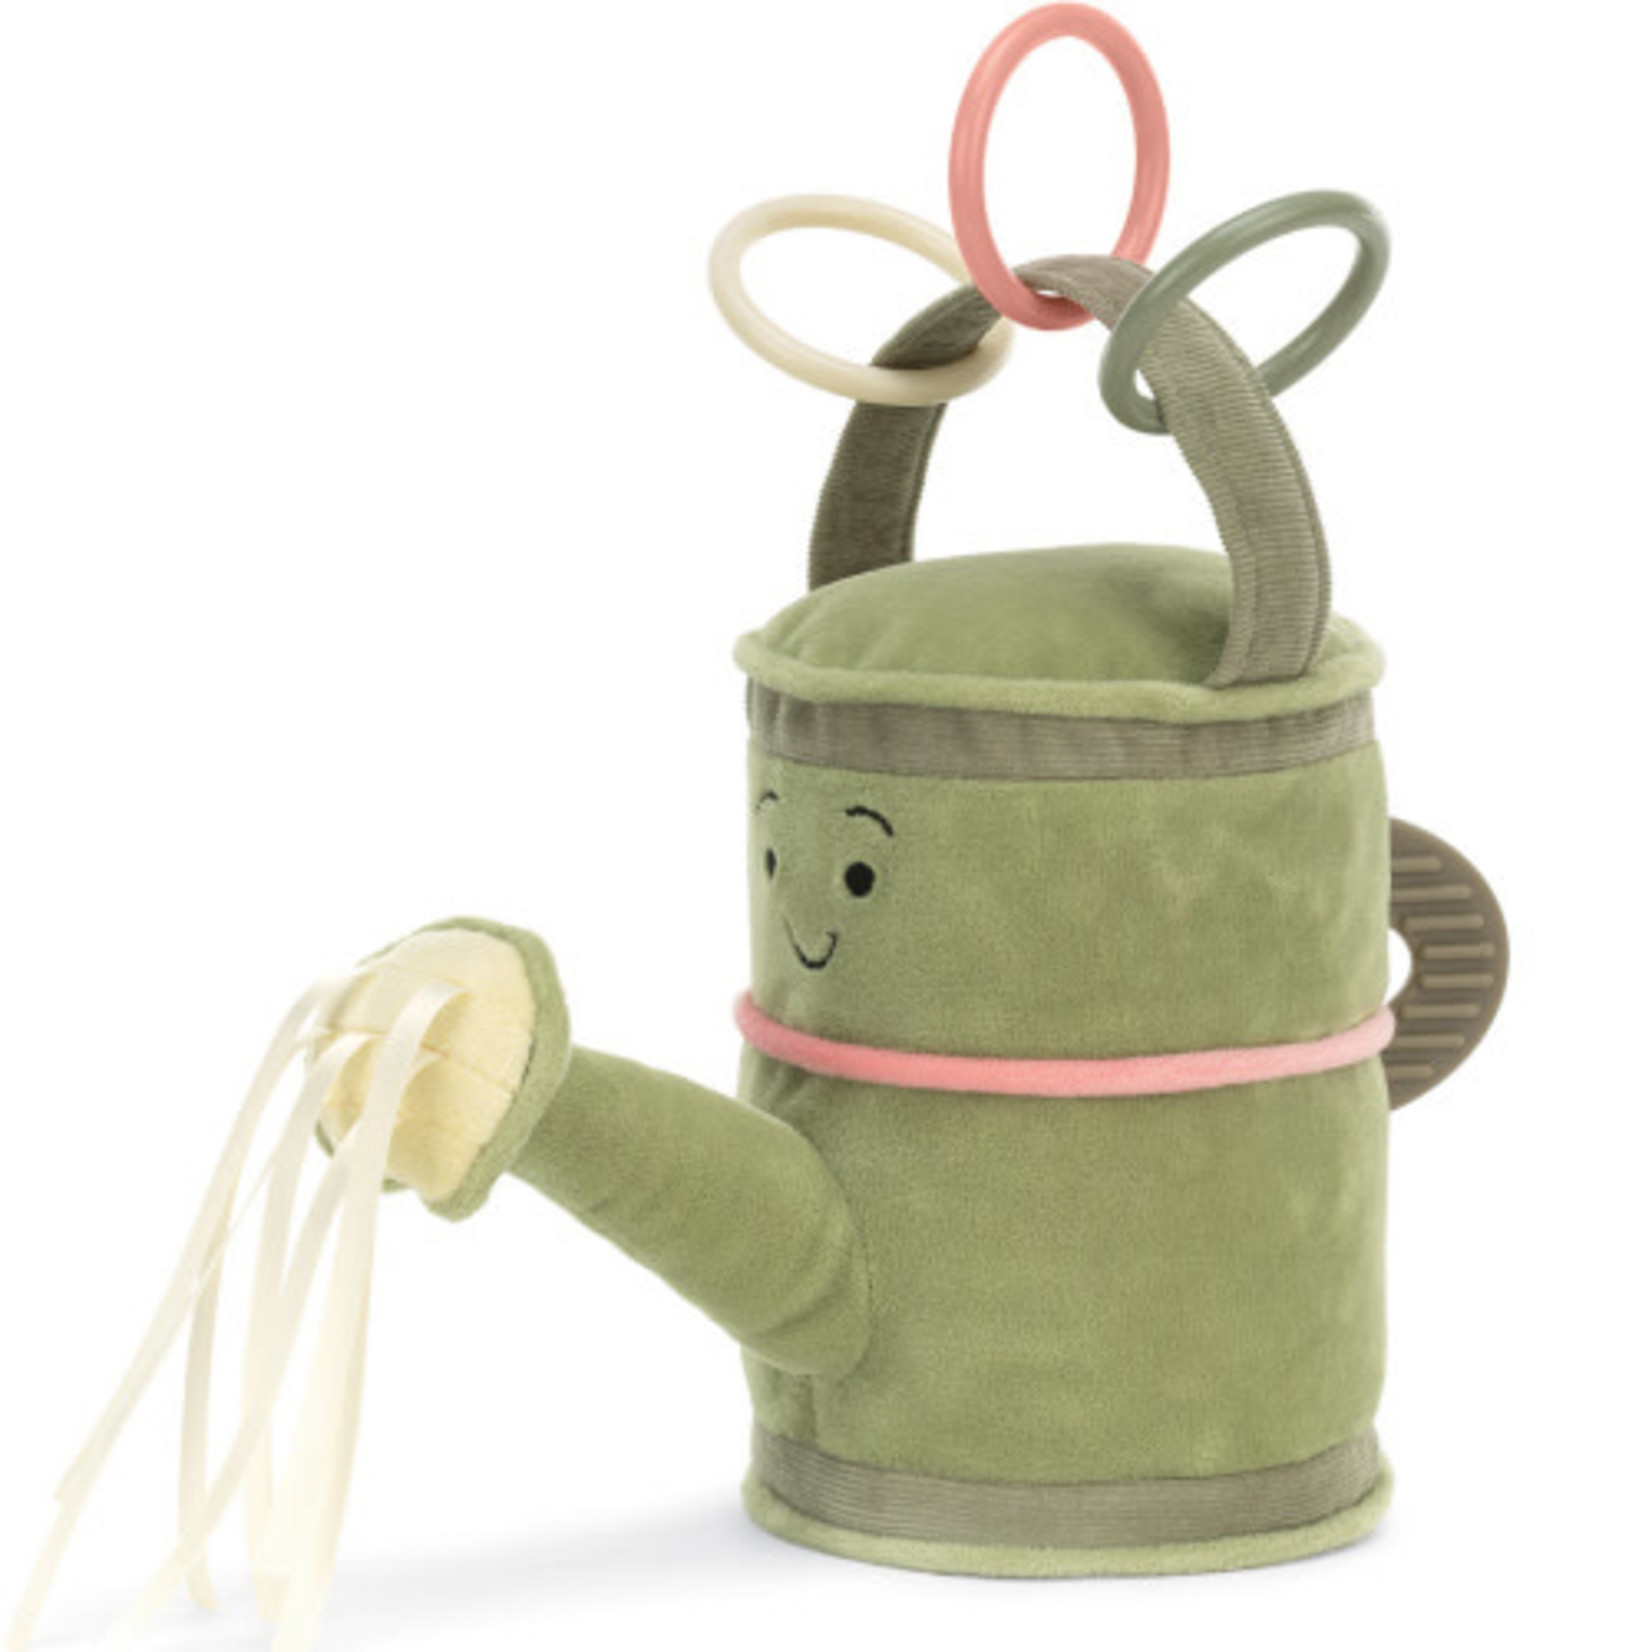 Jellycat JC Whimsy Garden Watering Can Activity Toy